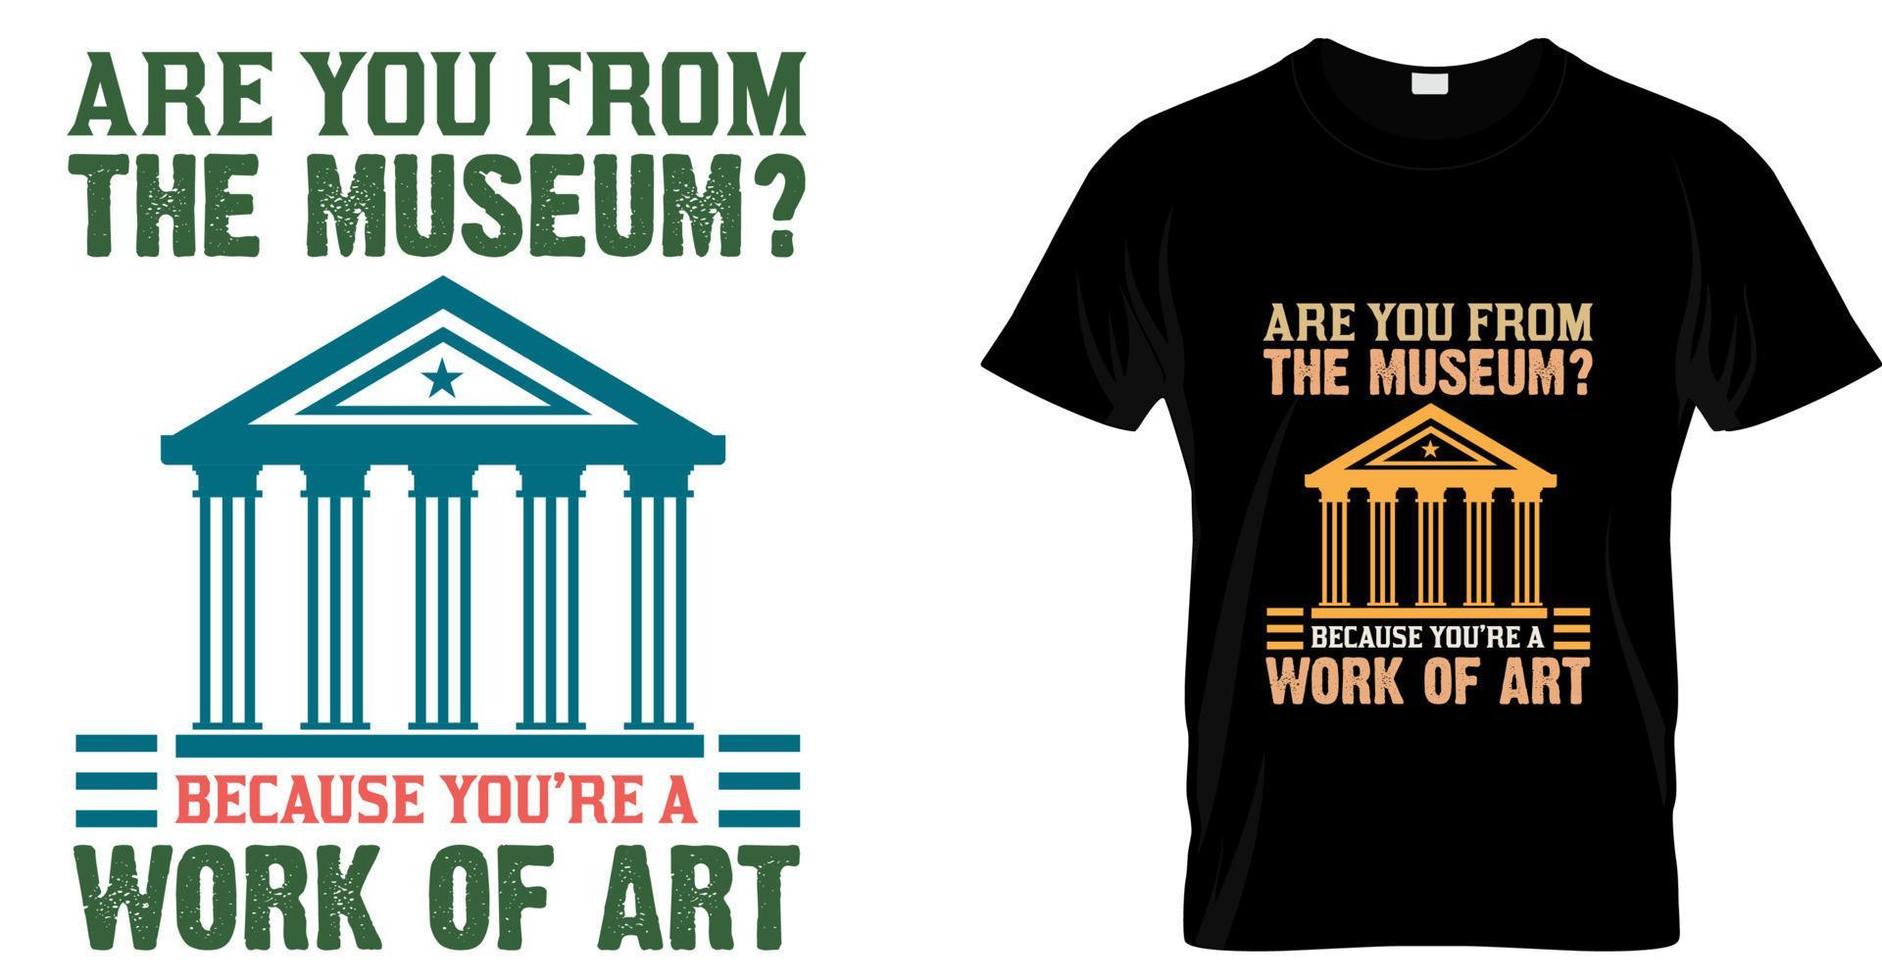 Are you from the museum because you're a work of art t shirt design. Museum funny t shirt design vector